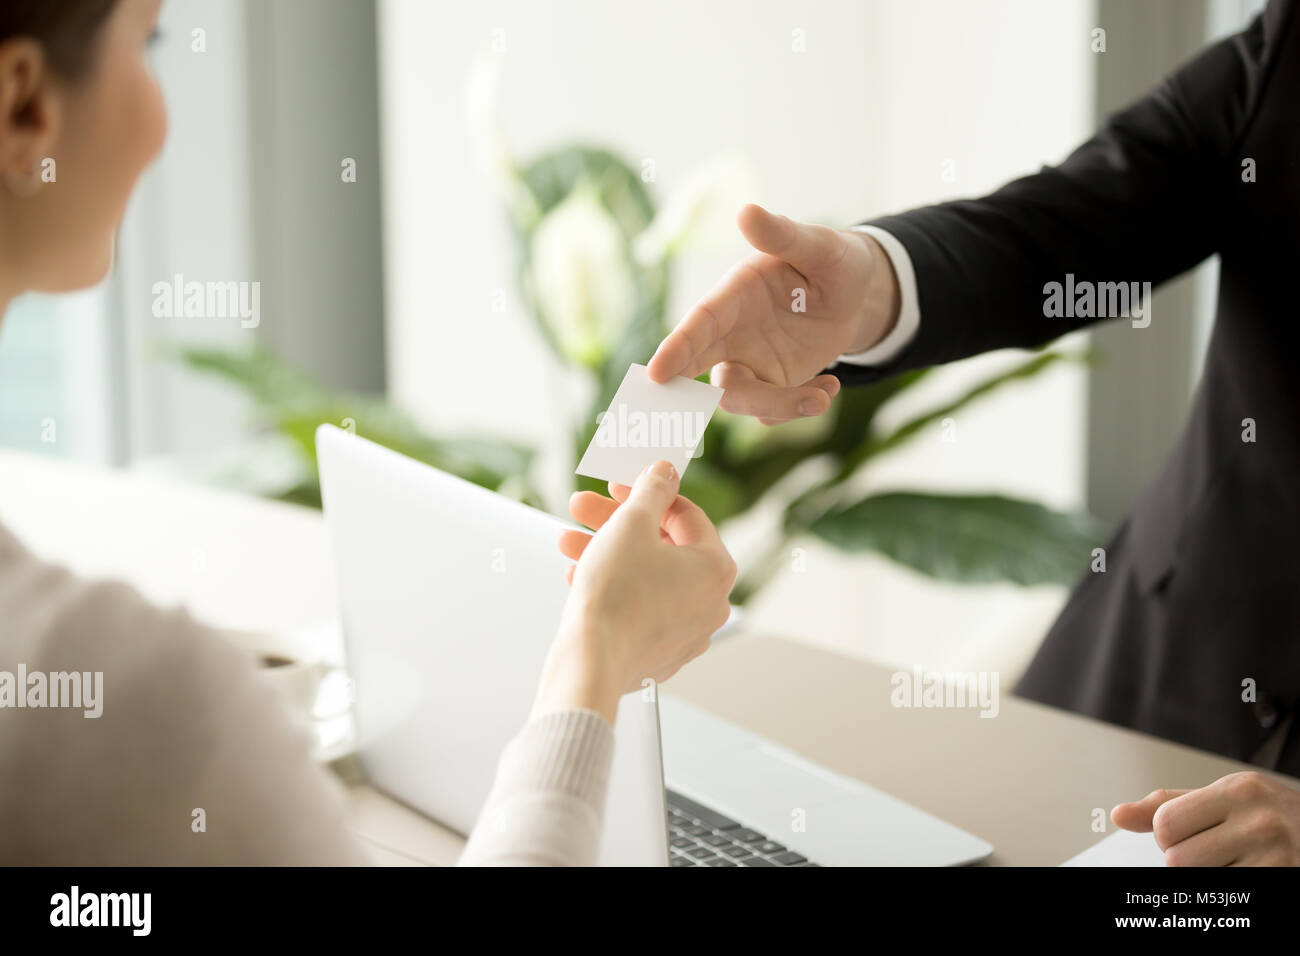 Businessman giving business card to businesswoman Stock Photo